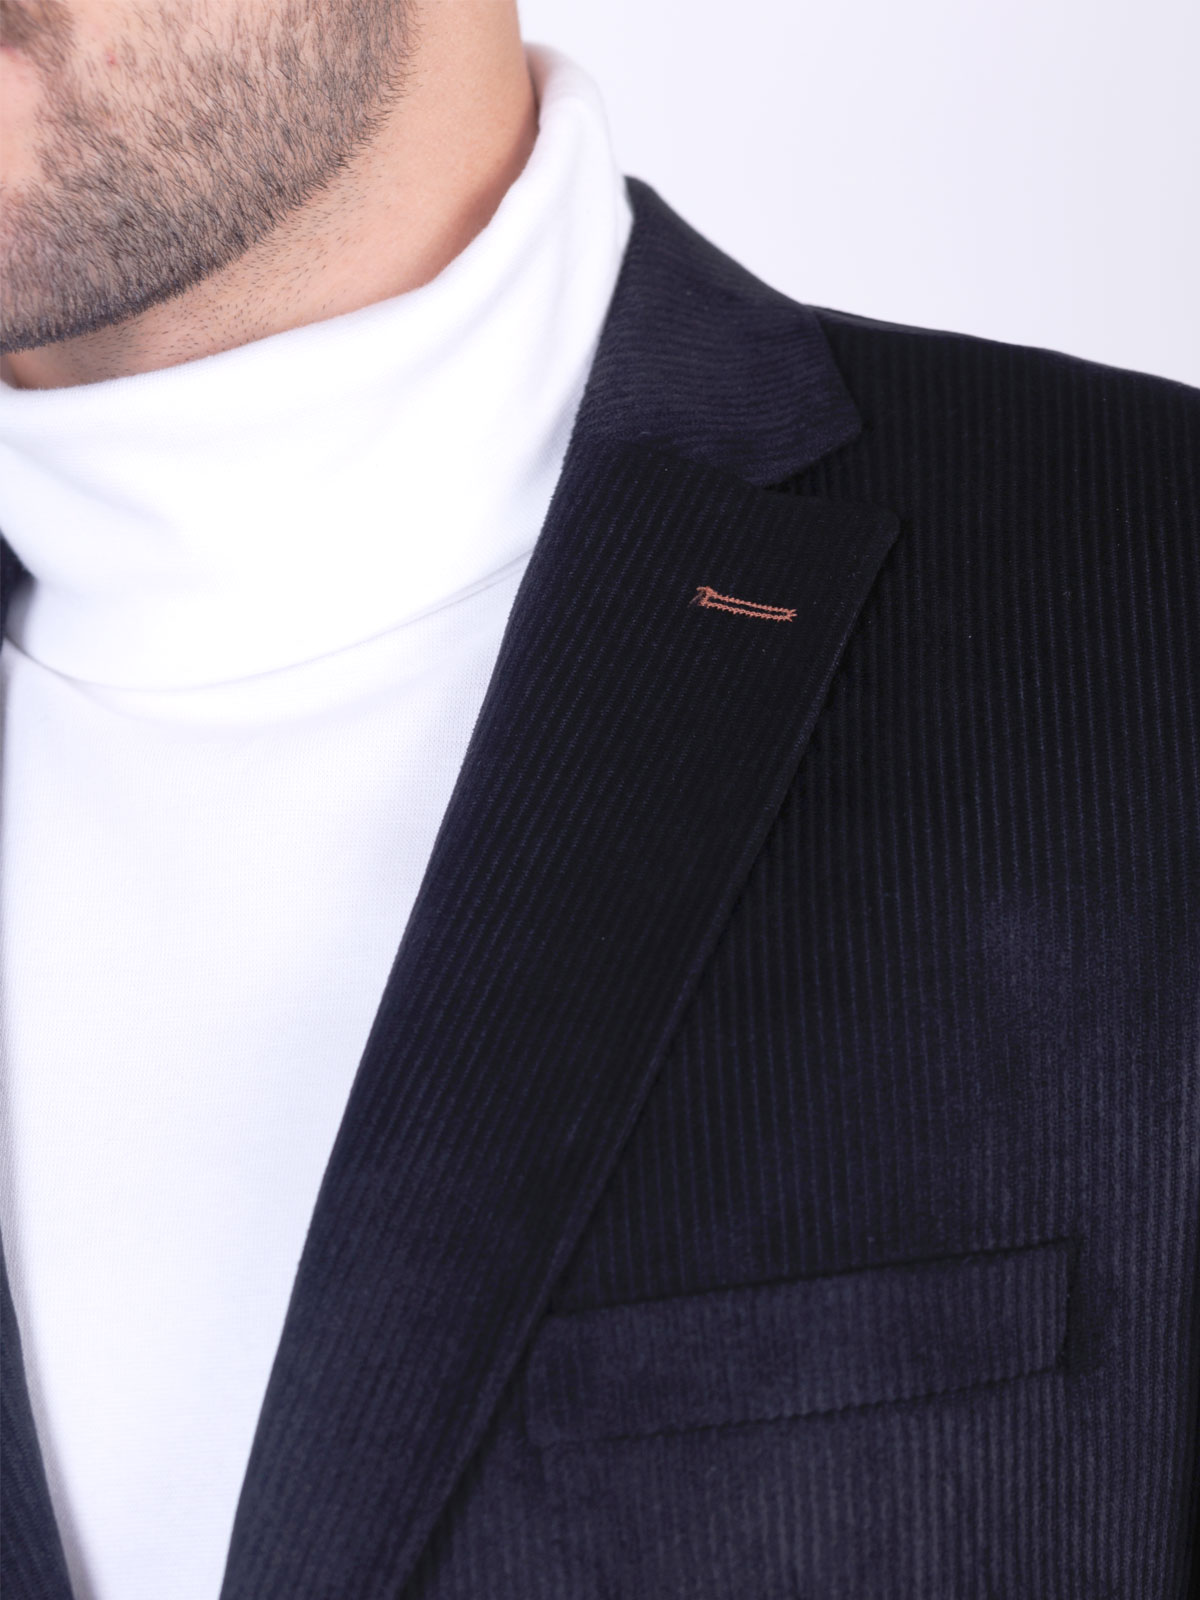 Mens striped suit in black - 68069 € 191.22 img3